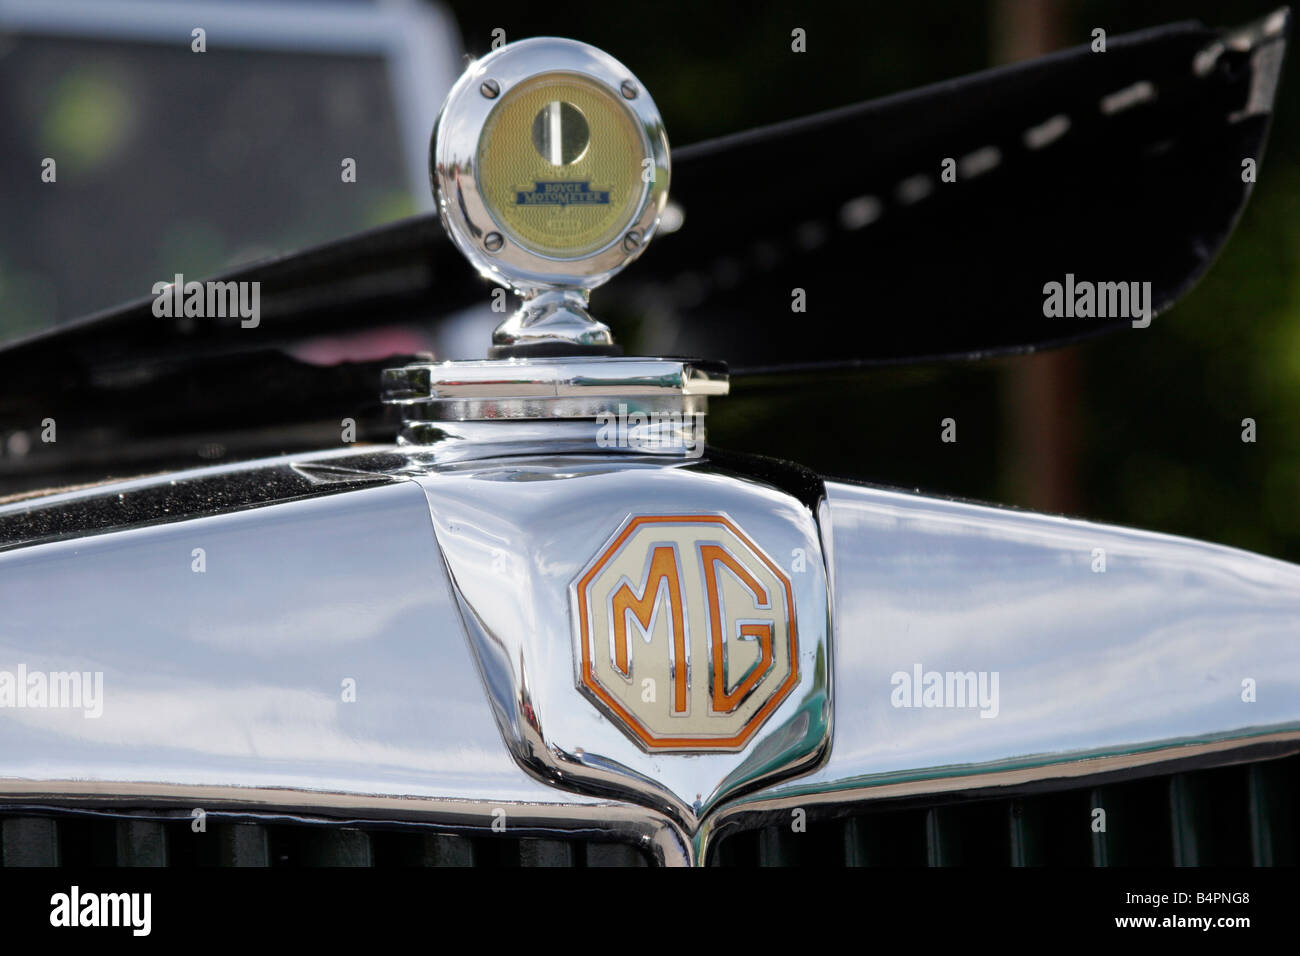 MG Badge on a classic car Stock Photo